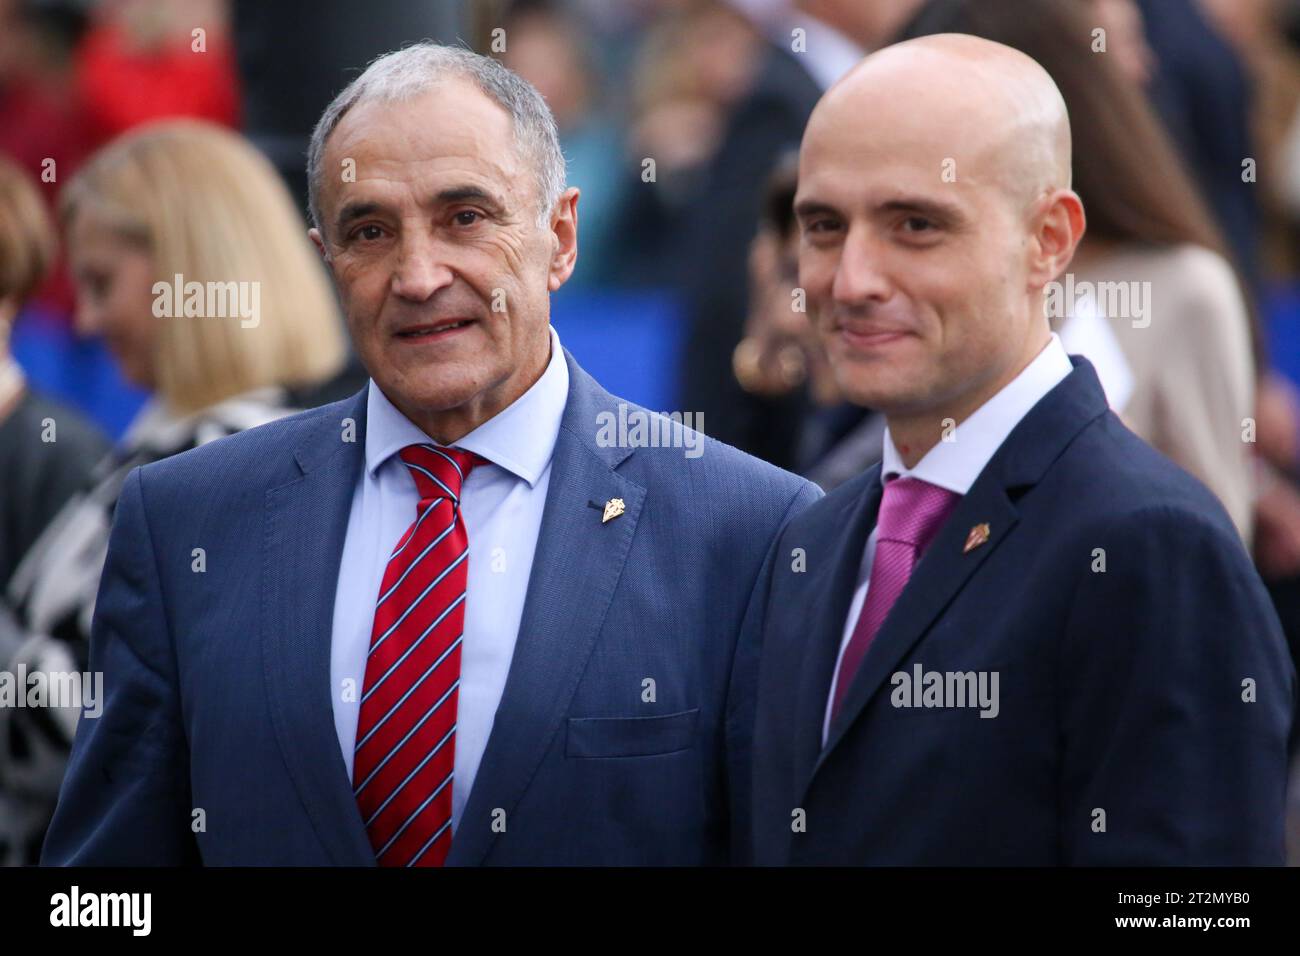 Oviedo, Asturias, October 20th, 2023: The representatives of Sporting de Gijón, Joaquín Alonso (L) and David Guerra (R) during the Blue Carpet of the Princess Awards 2023, on October 20, 2023, in Oviedo, Spain. Credit: Alberto Brevers / Alamy Live News. Stock Photo